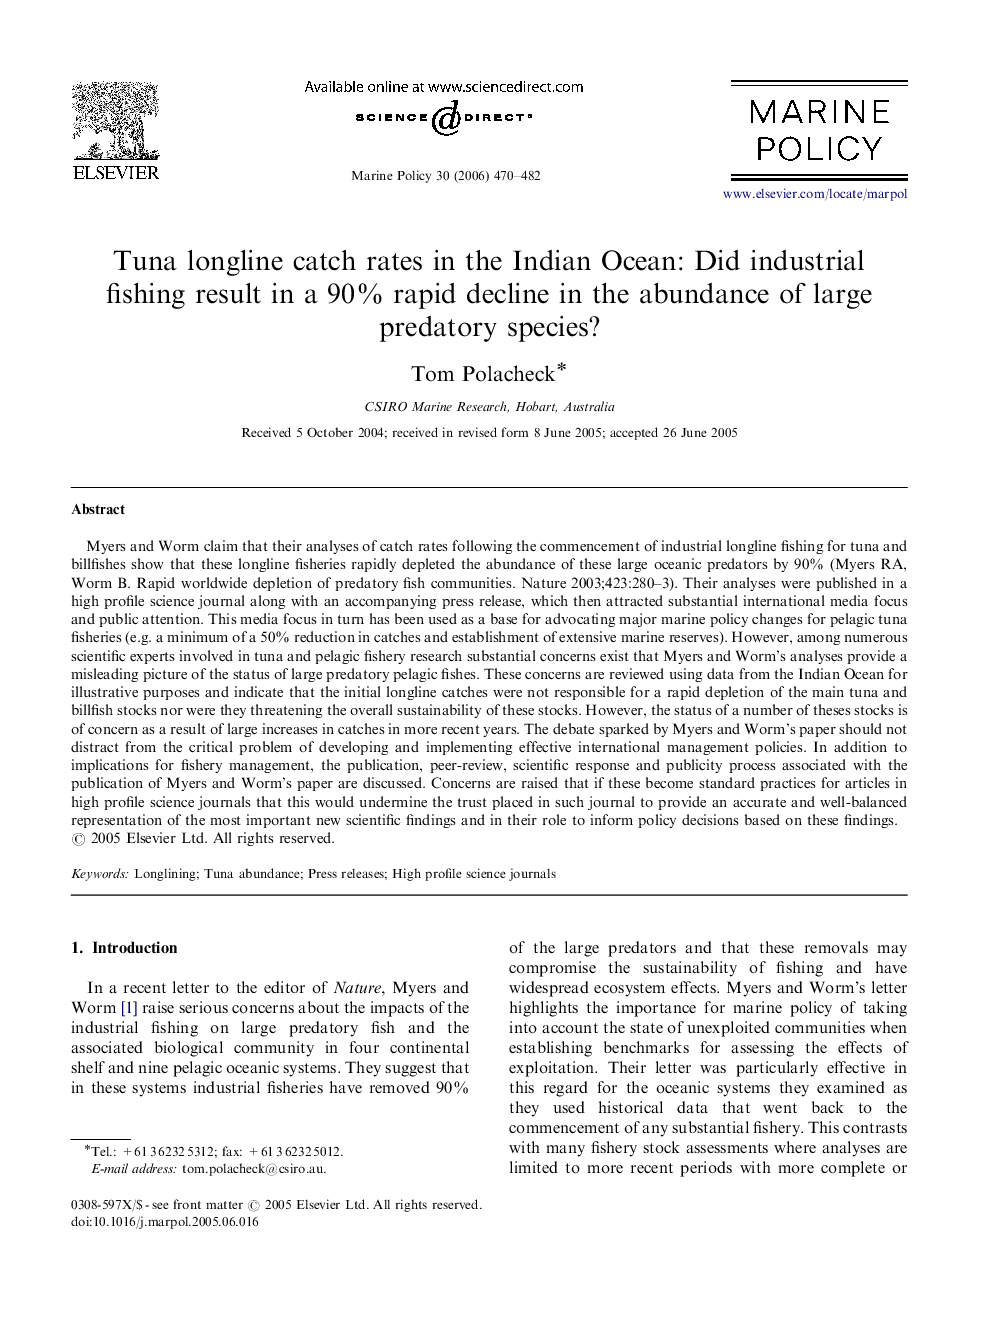 Tuna longline catch rates in the Indian Ocean: Did industrial fishing result in a 90% rapid decline in the abundance of large predatory species?